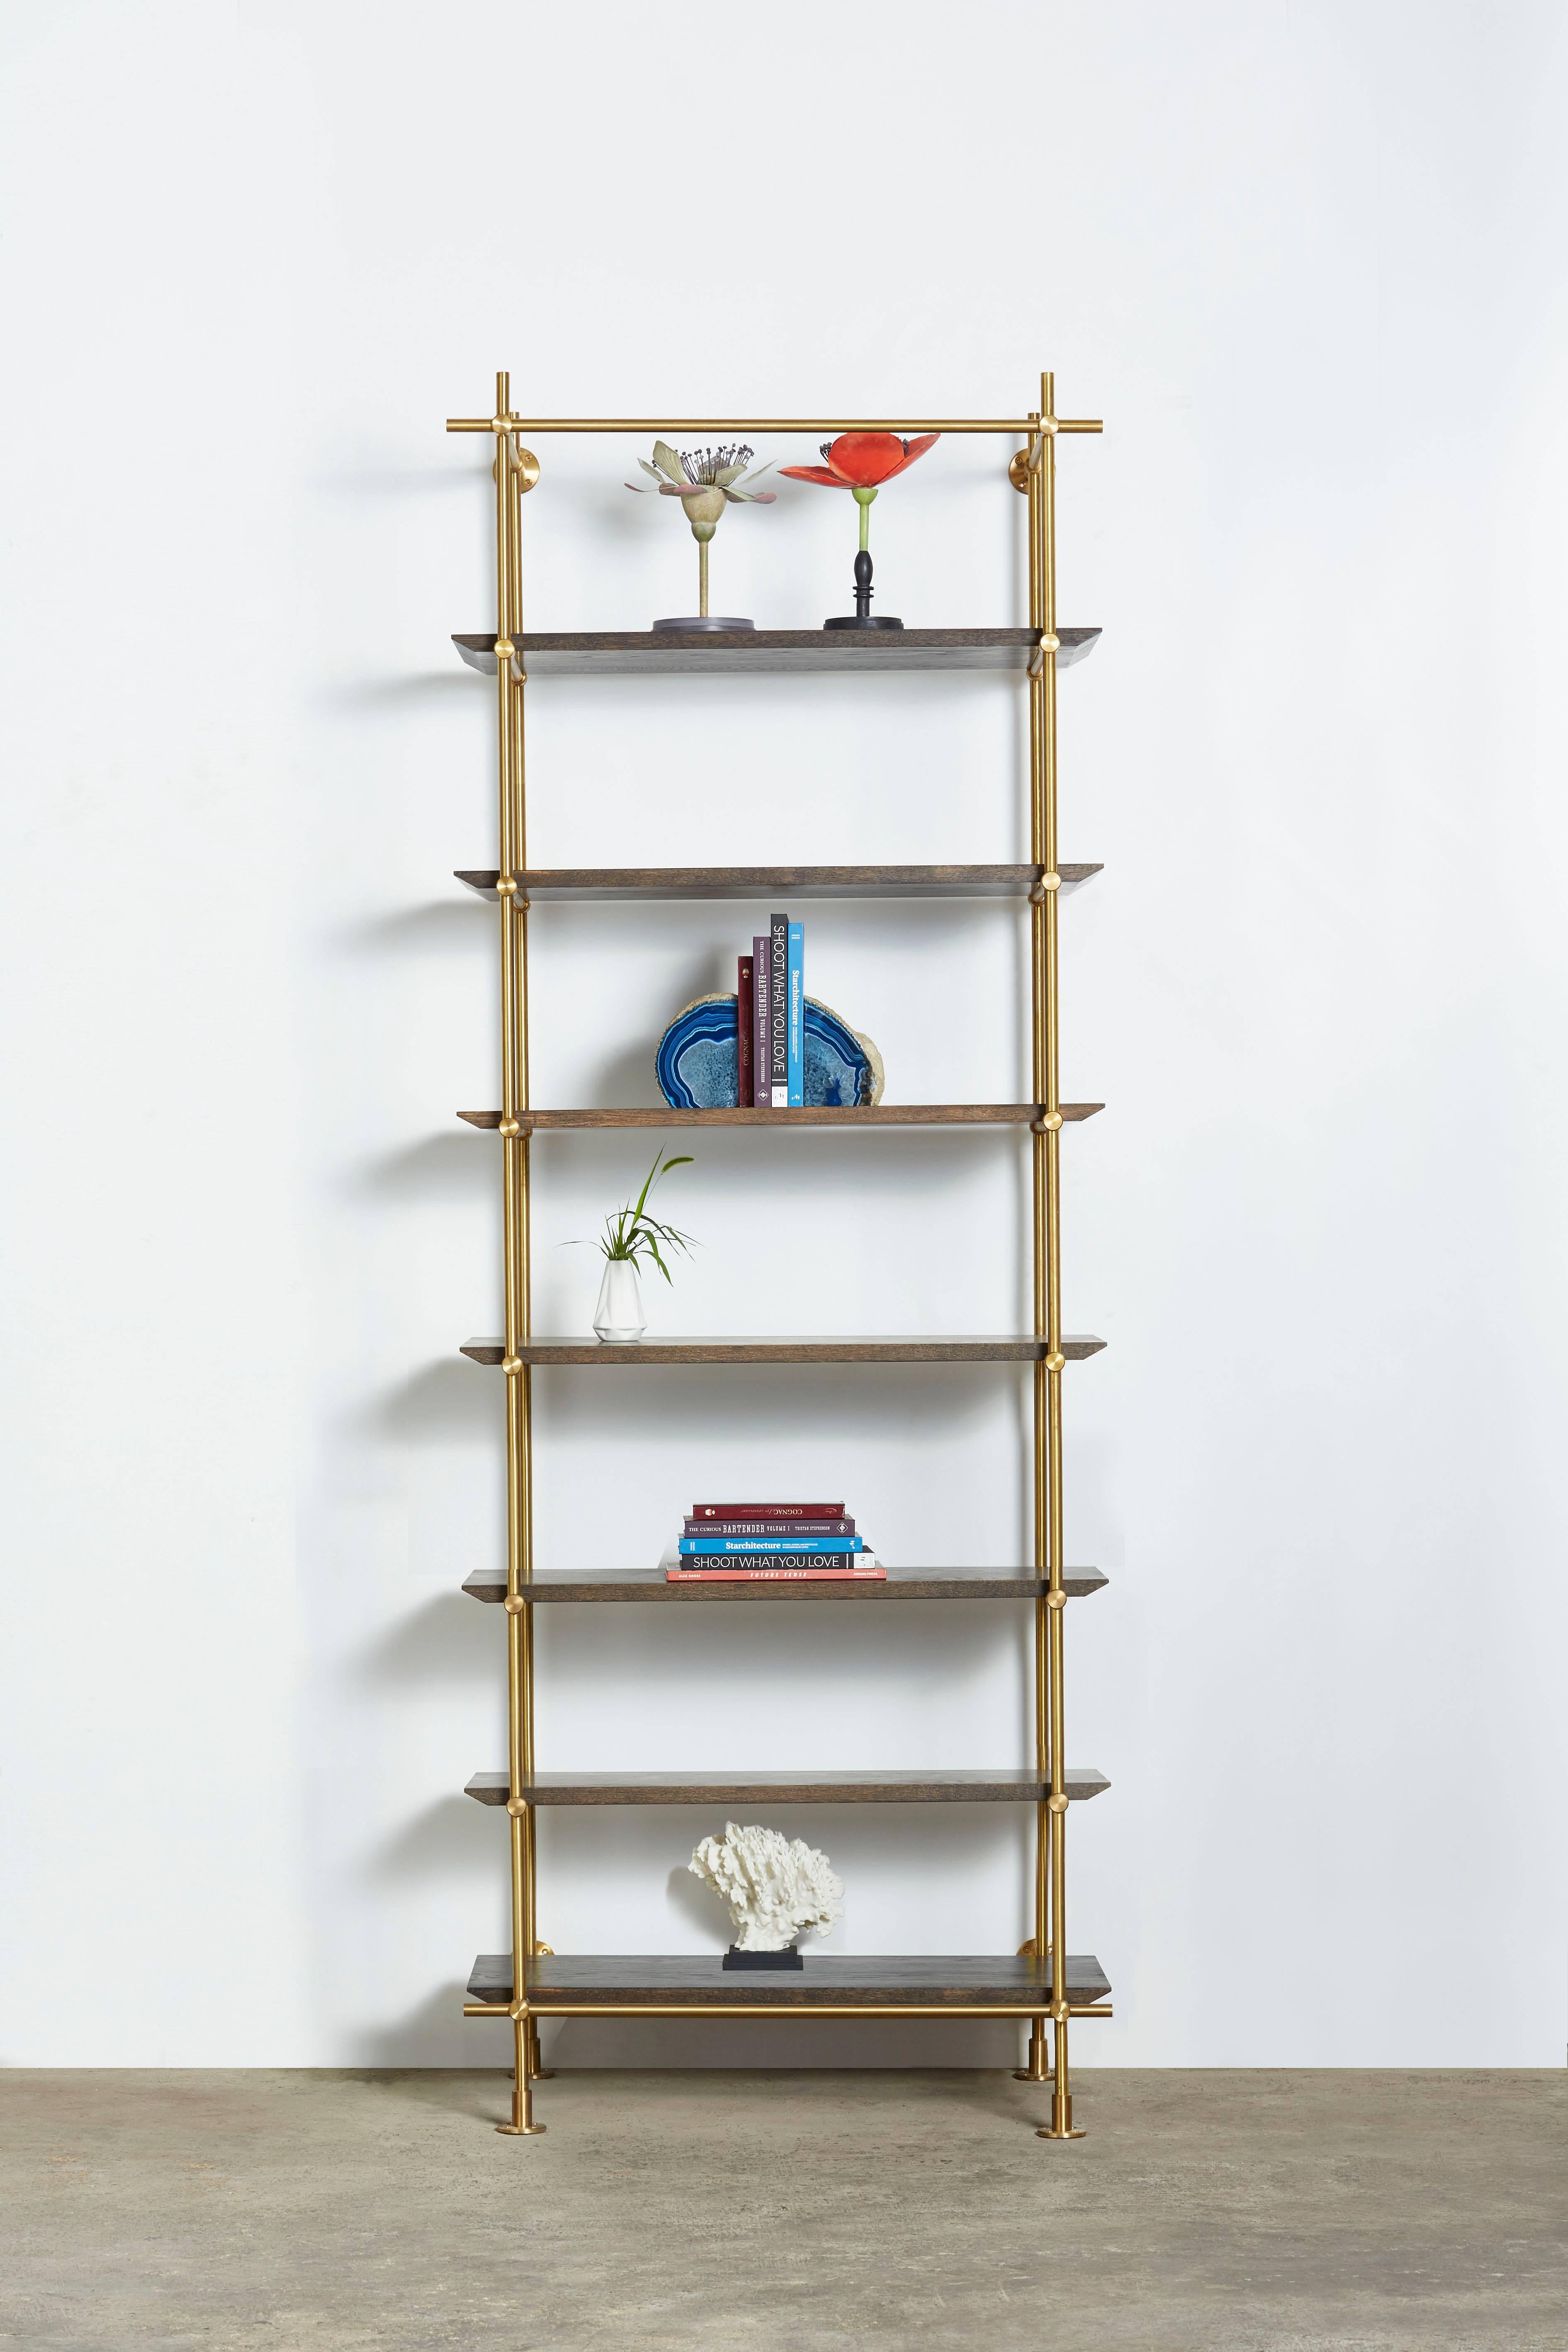 This single bay version of Amuneal’s Collector’s shelving unit features solid machined brass fittings and posts in a warm brass finish. The unit mounts to the floor and to the wall to support a series of easily adjustable solid wood shelves. The